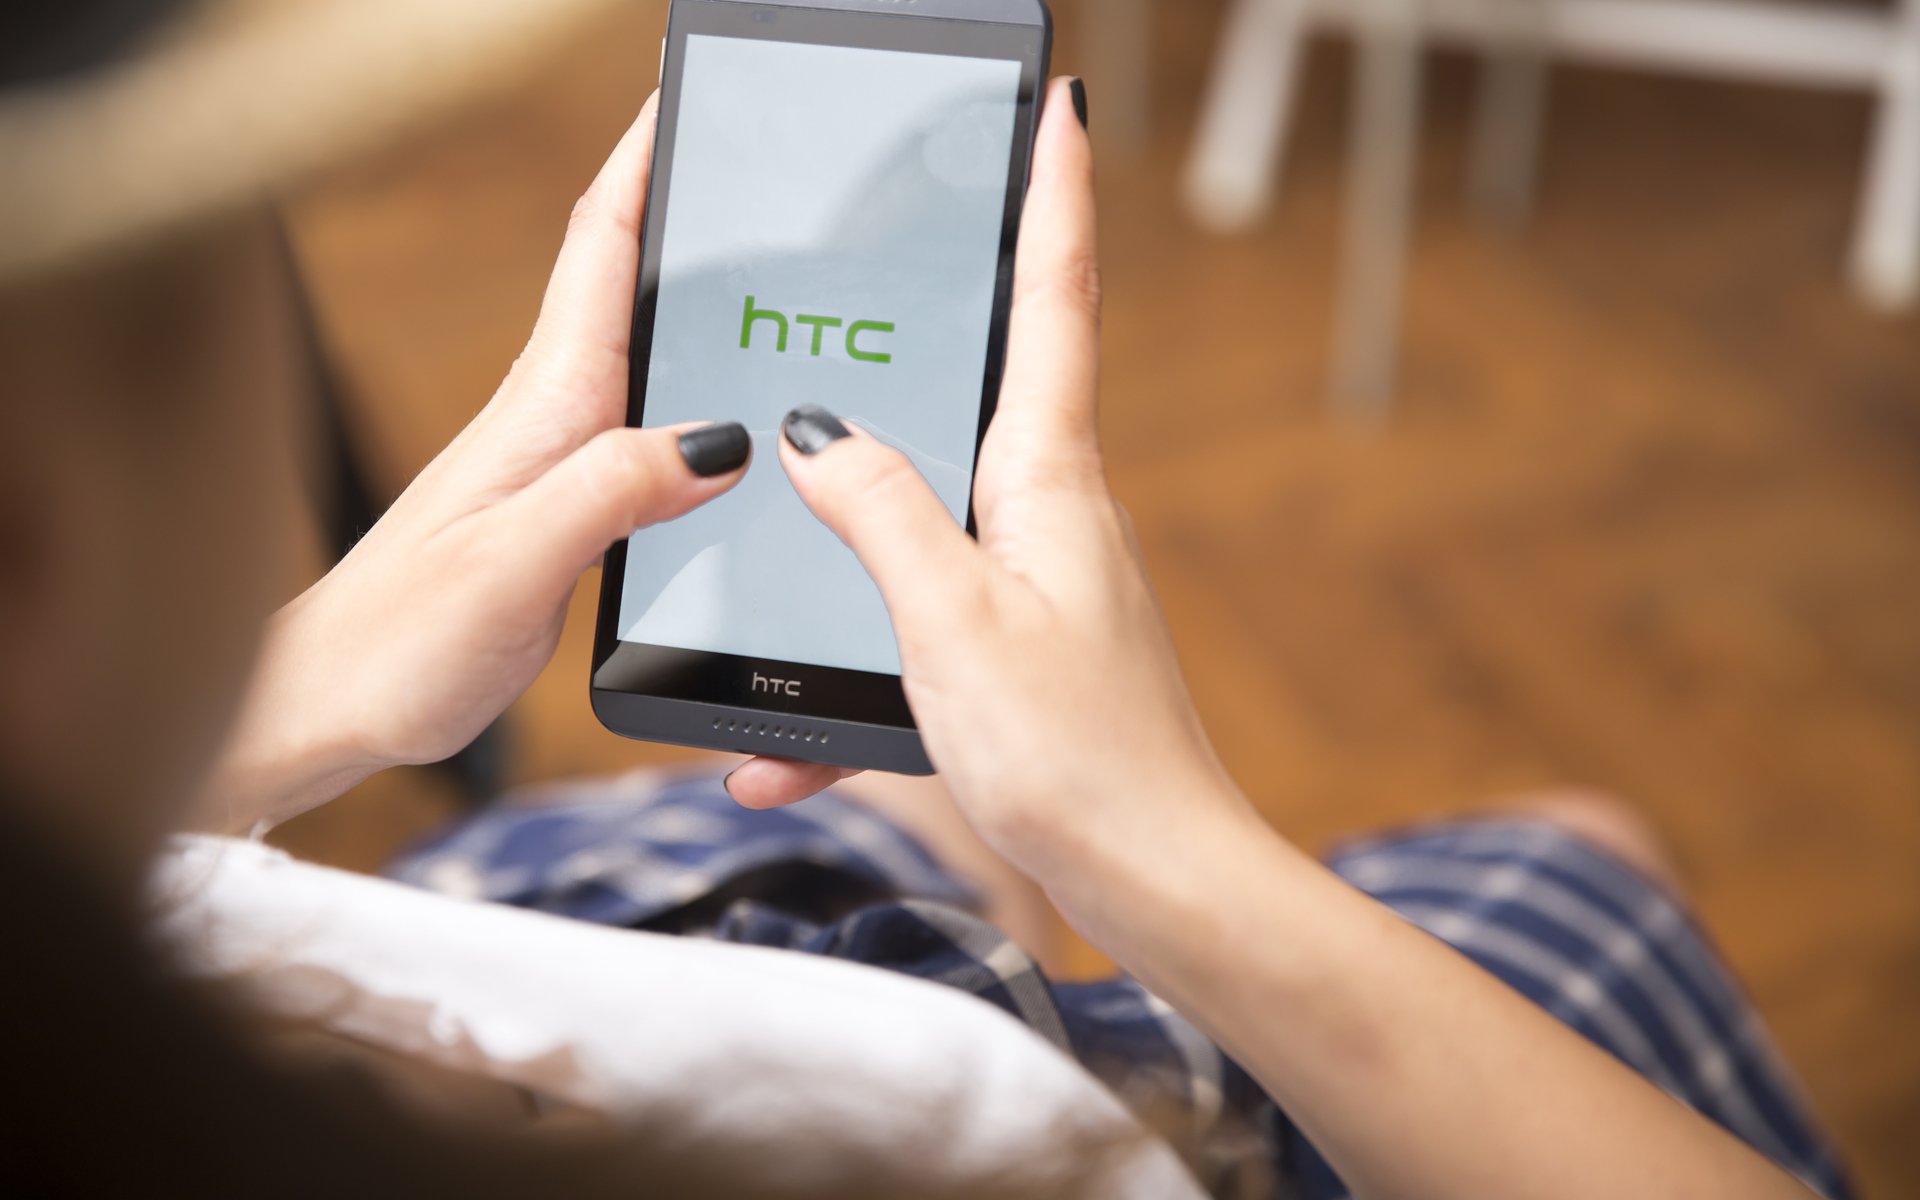 HTC Announces ‘Exodus,’ New Smartphone for Decentralized Bitcoin and Ethereum Apps